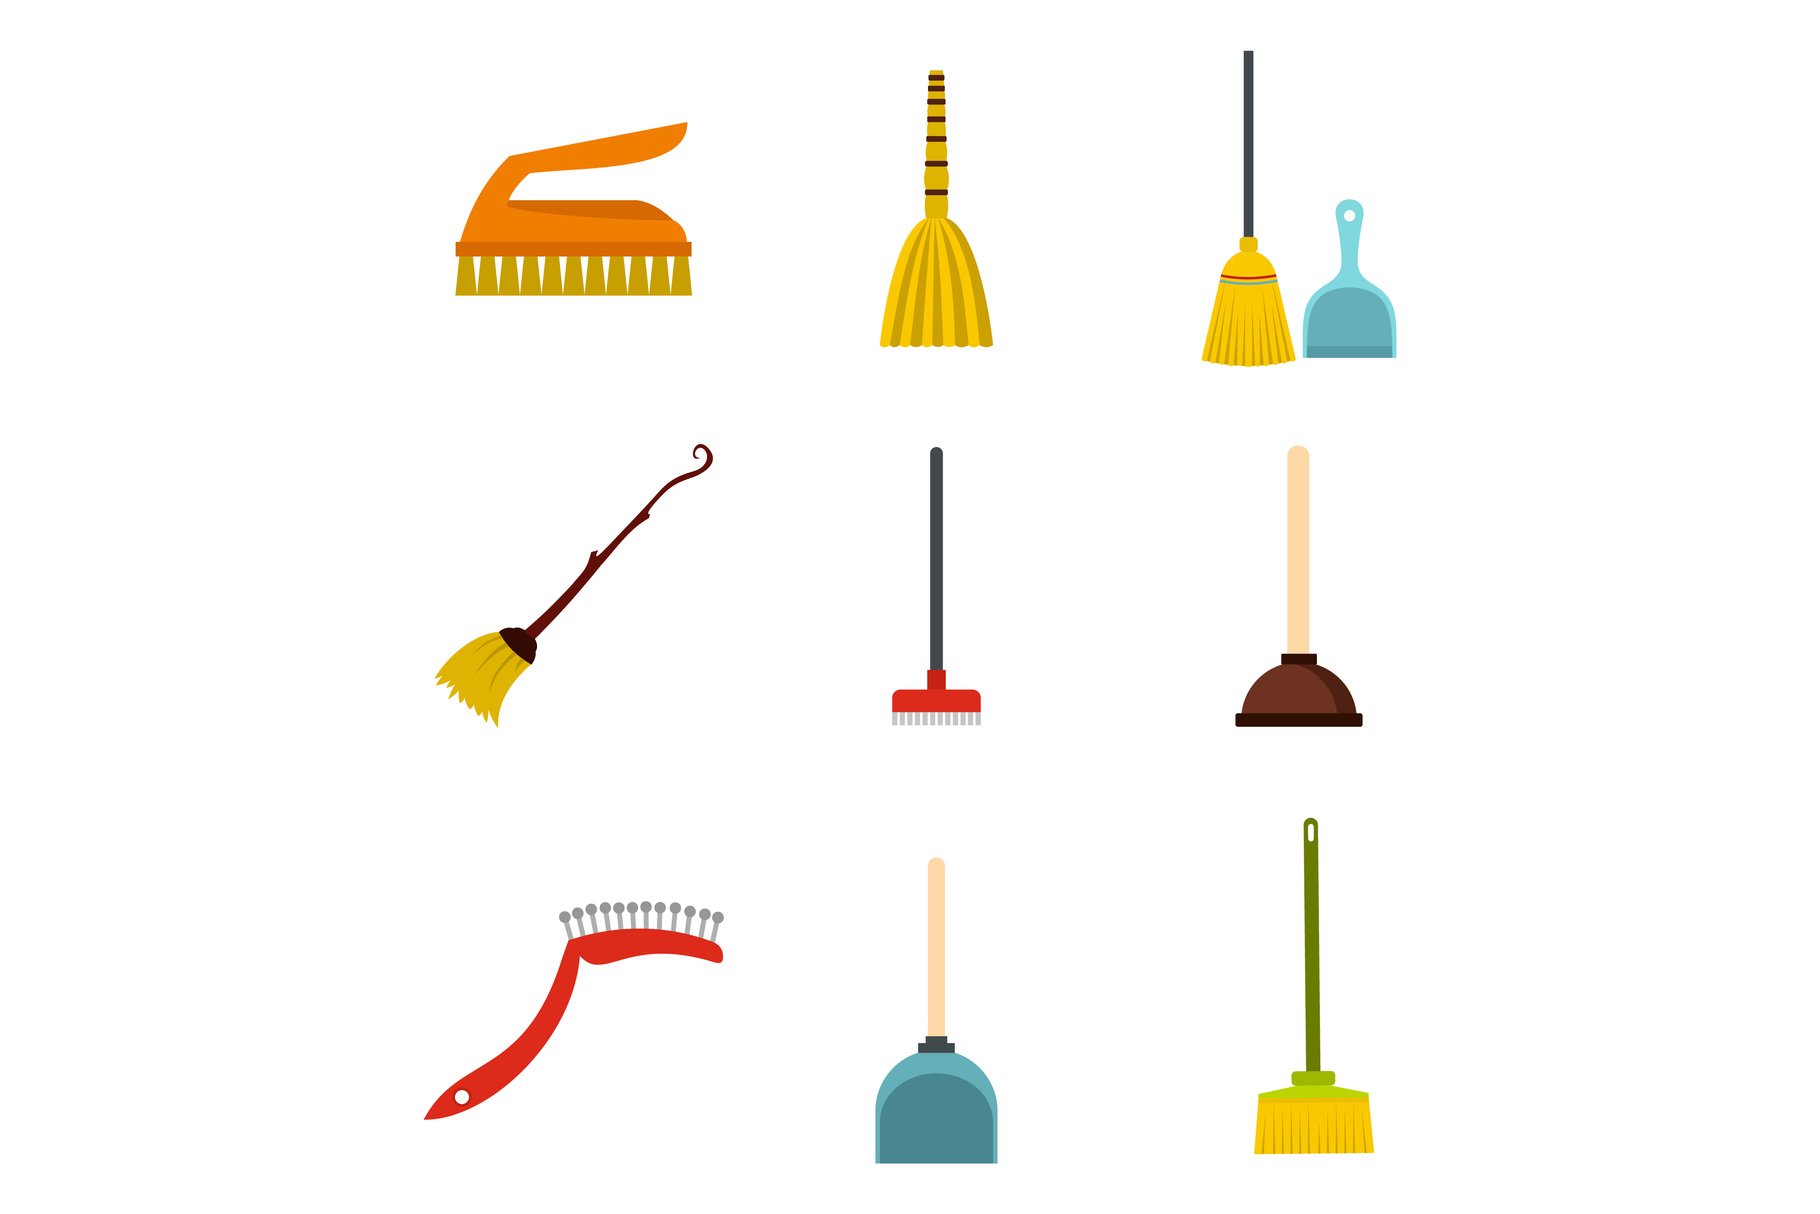 Cleaning tools icon set, flat style cover image.